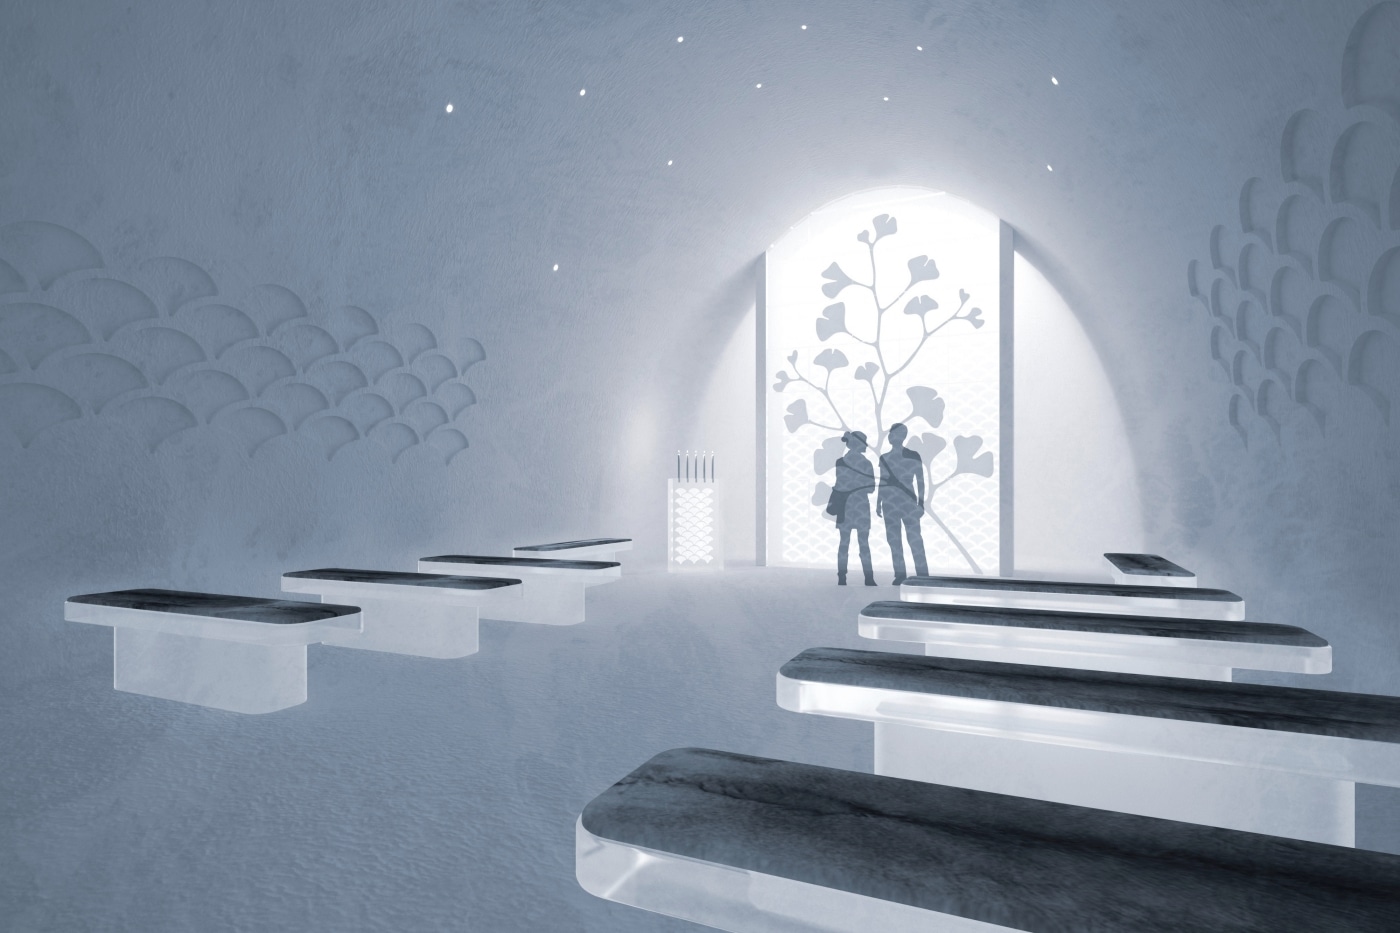 Room Designs for Ice Hotel in Sweden